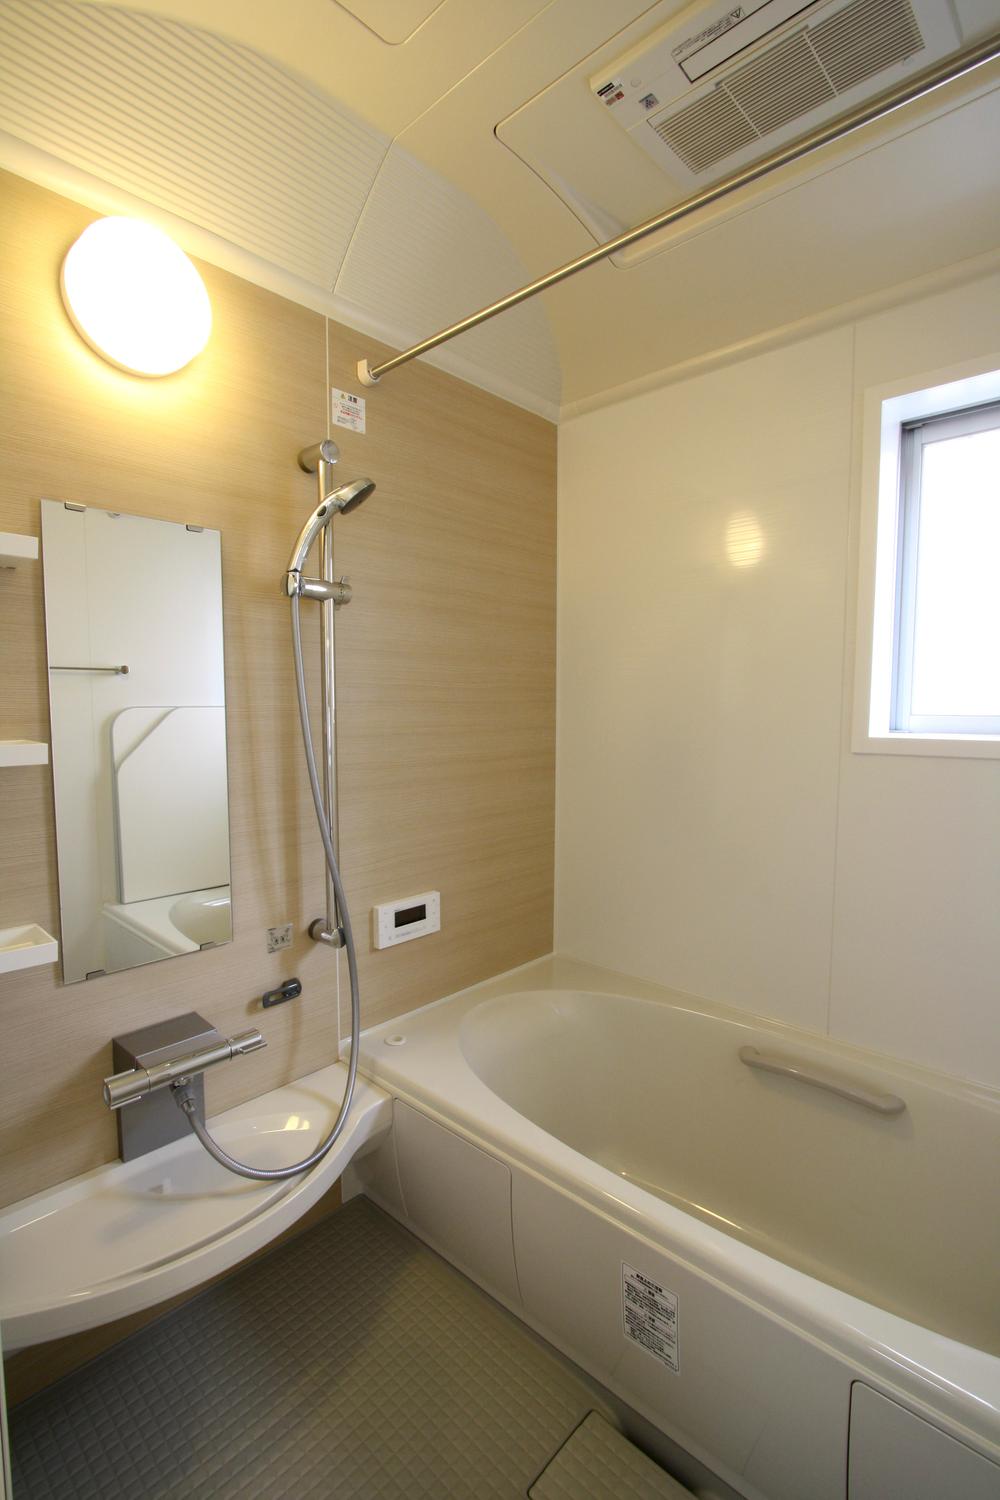 Bathroom. safety ・ Adopt the latest system bus with excellent thermal insulation (April 2013) Shooting